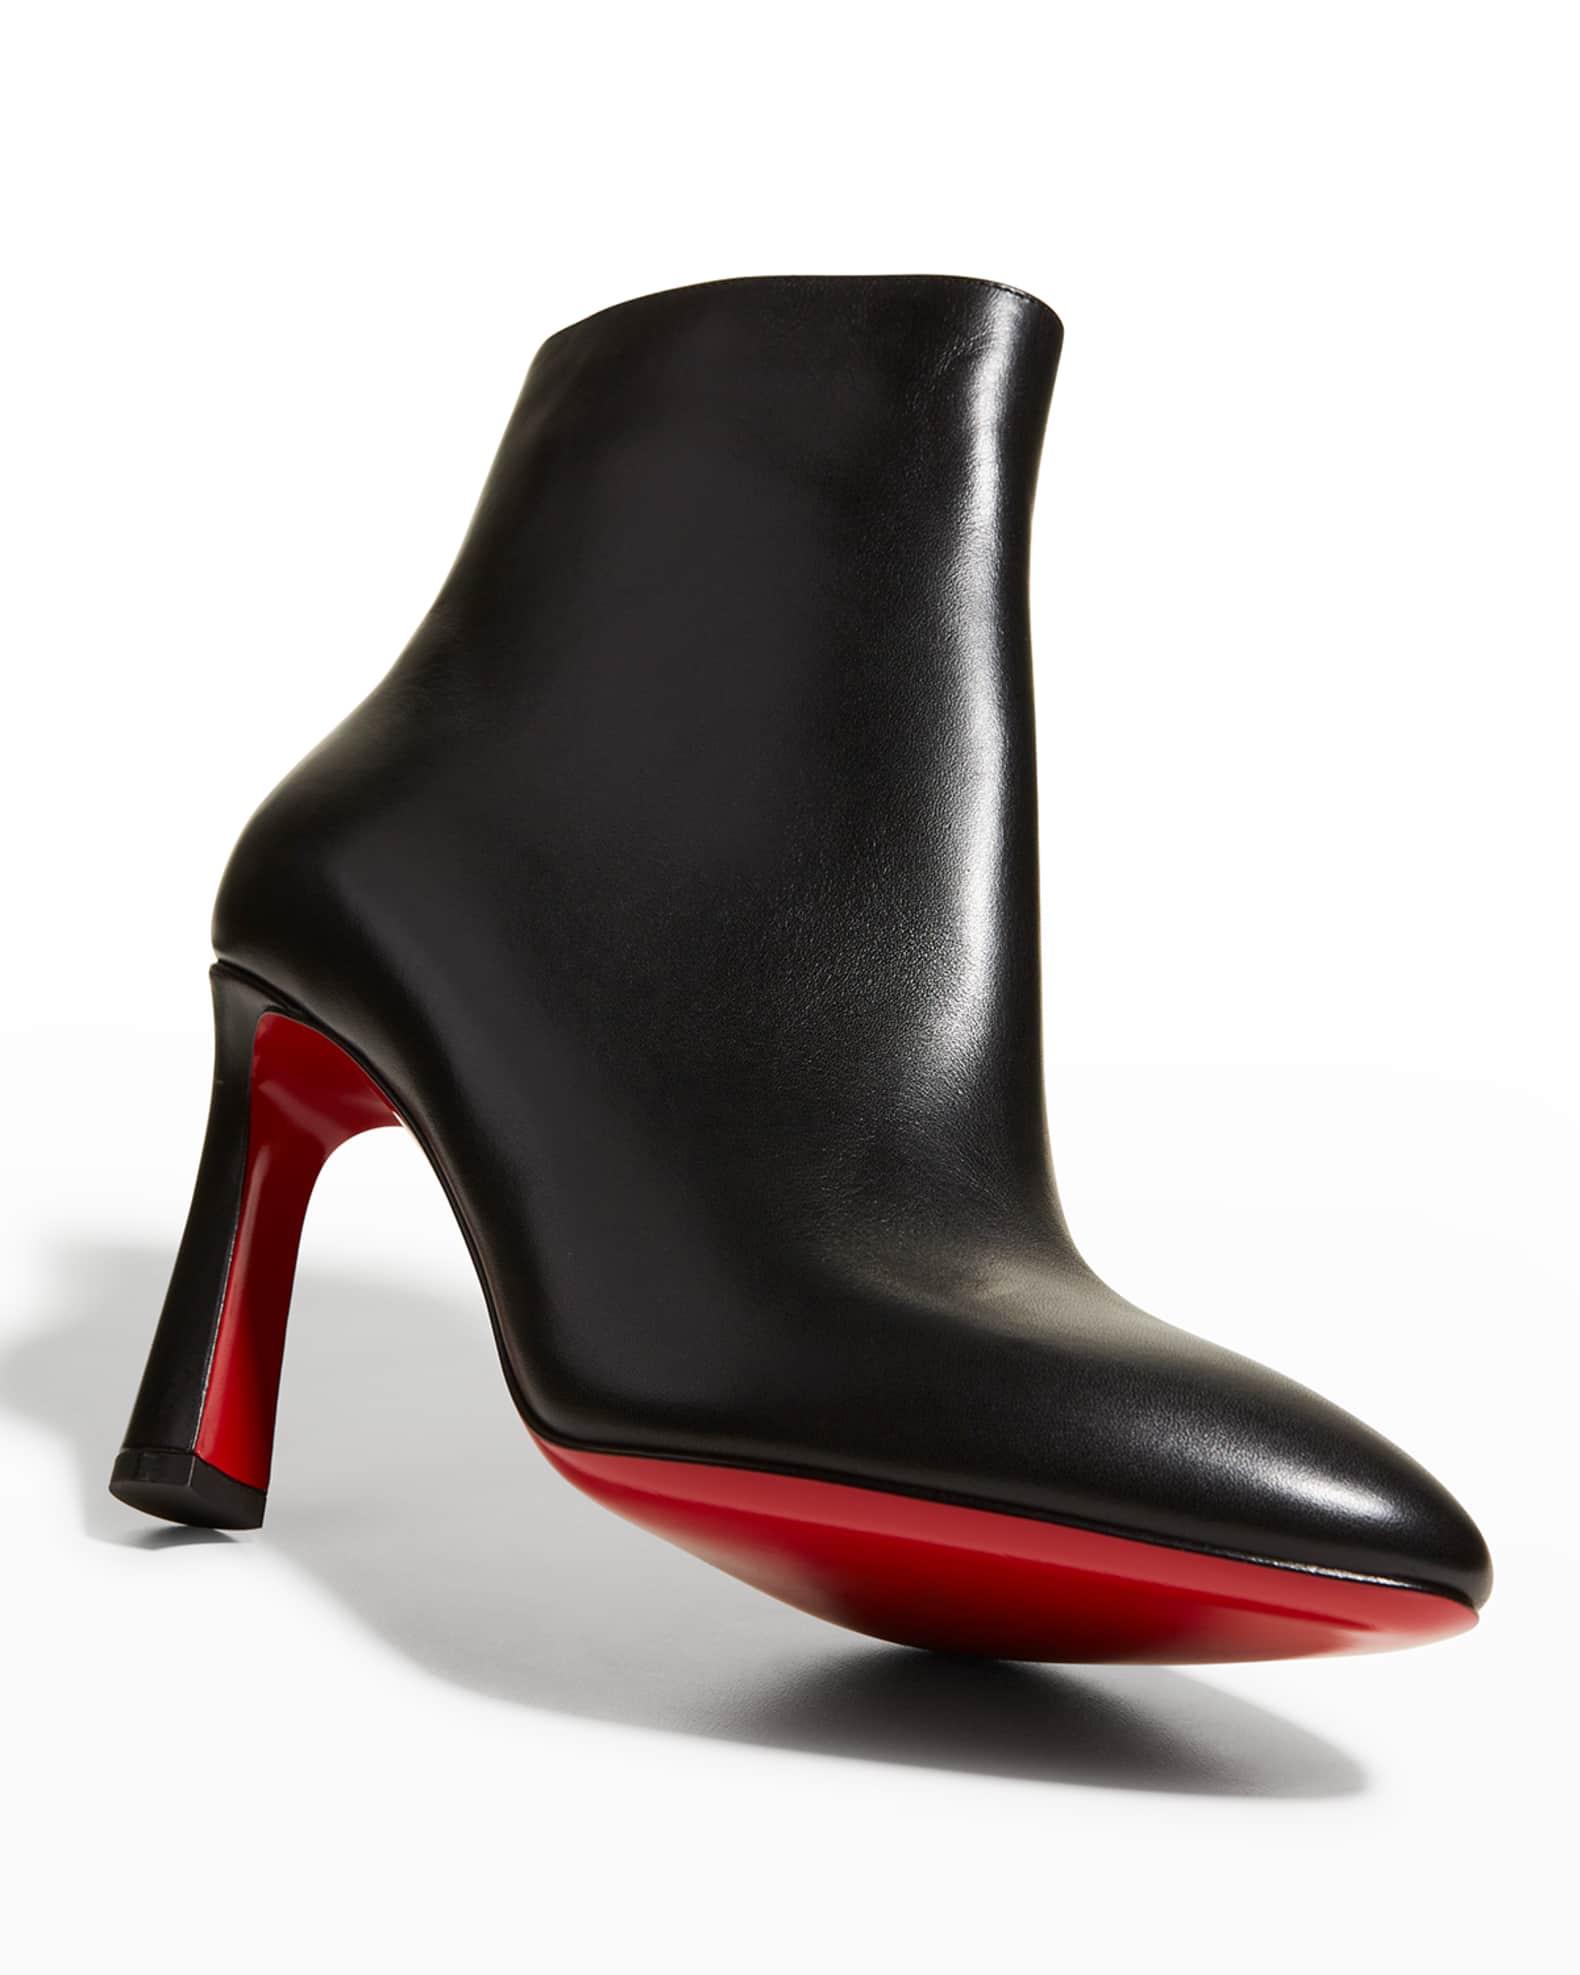 Christian Louboutin So Eleonor Leather Red Sole Booties | Neiman Marcus